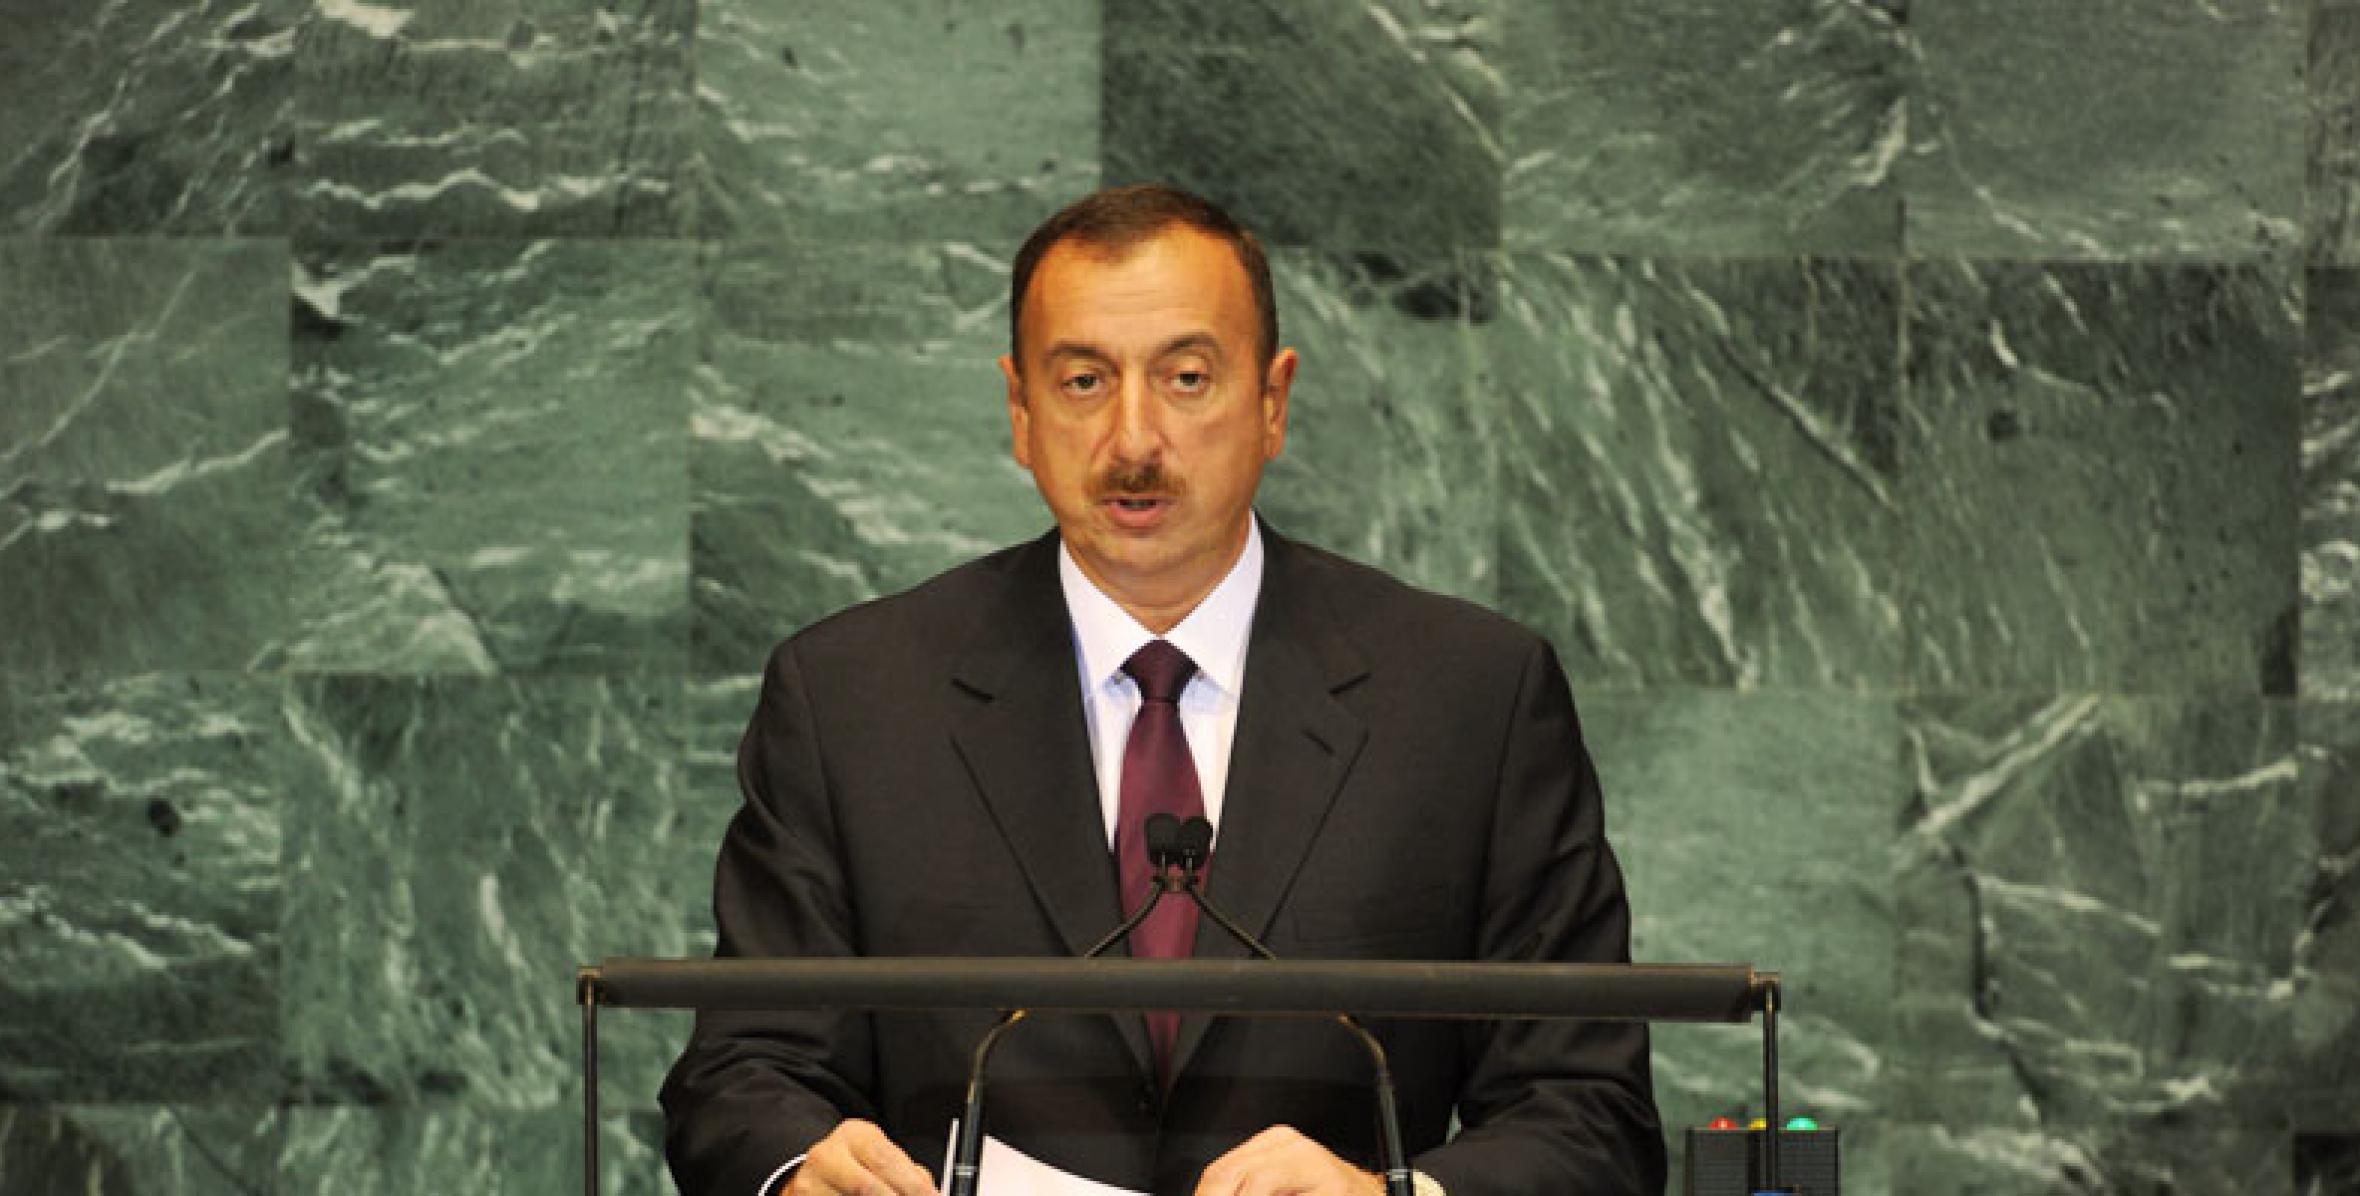 Speech by Ilham Aliyev at the 65th session of the United Nations General Assembly